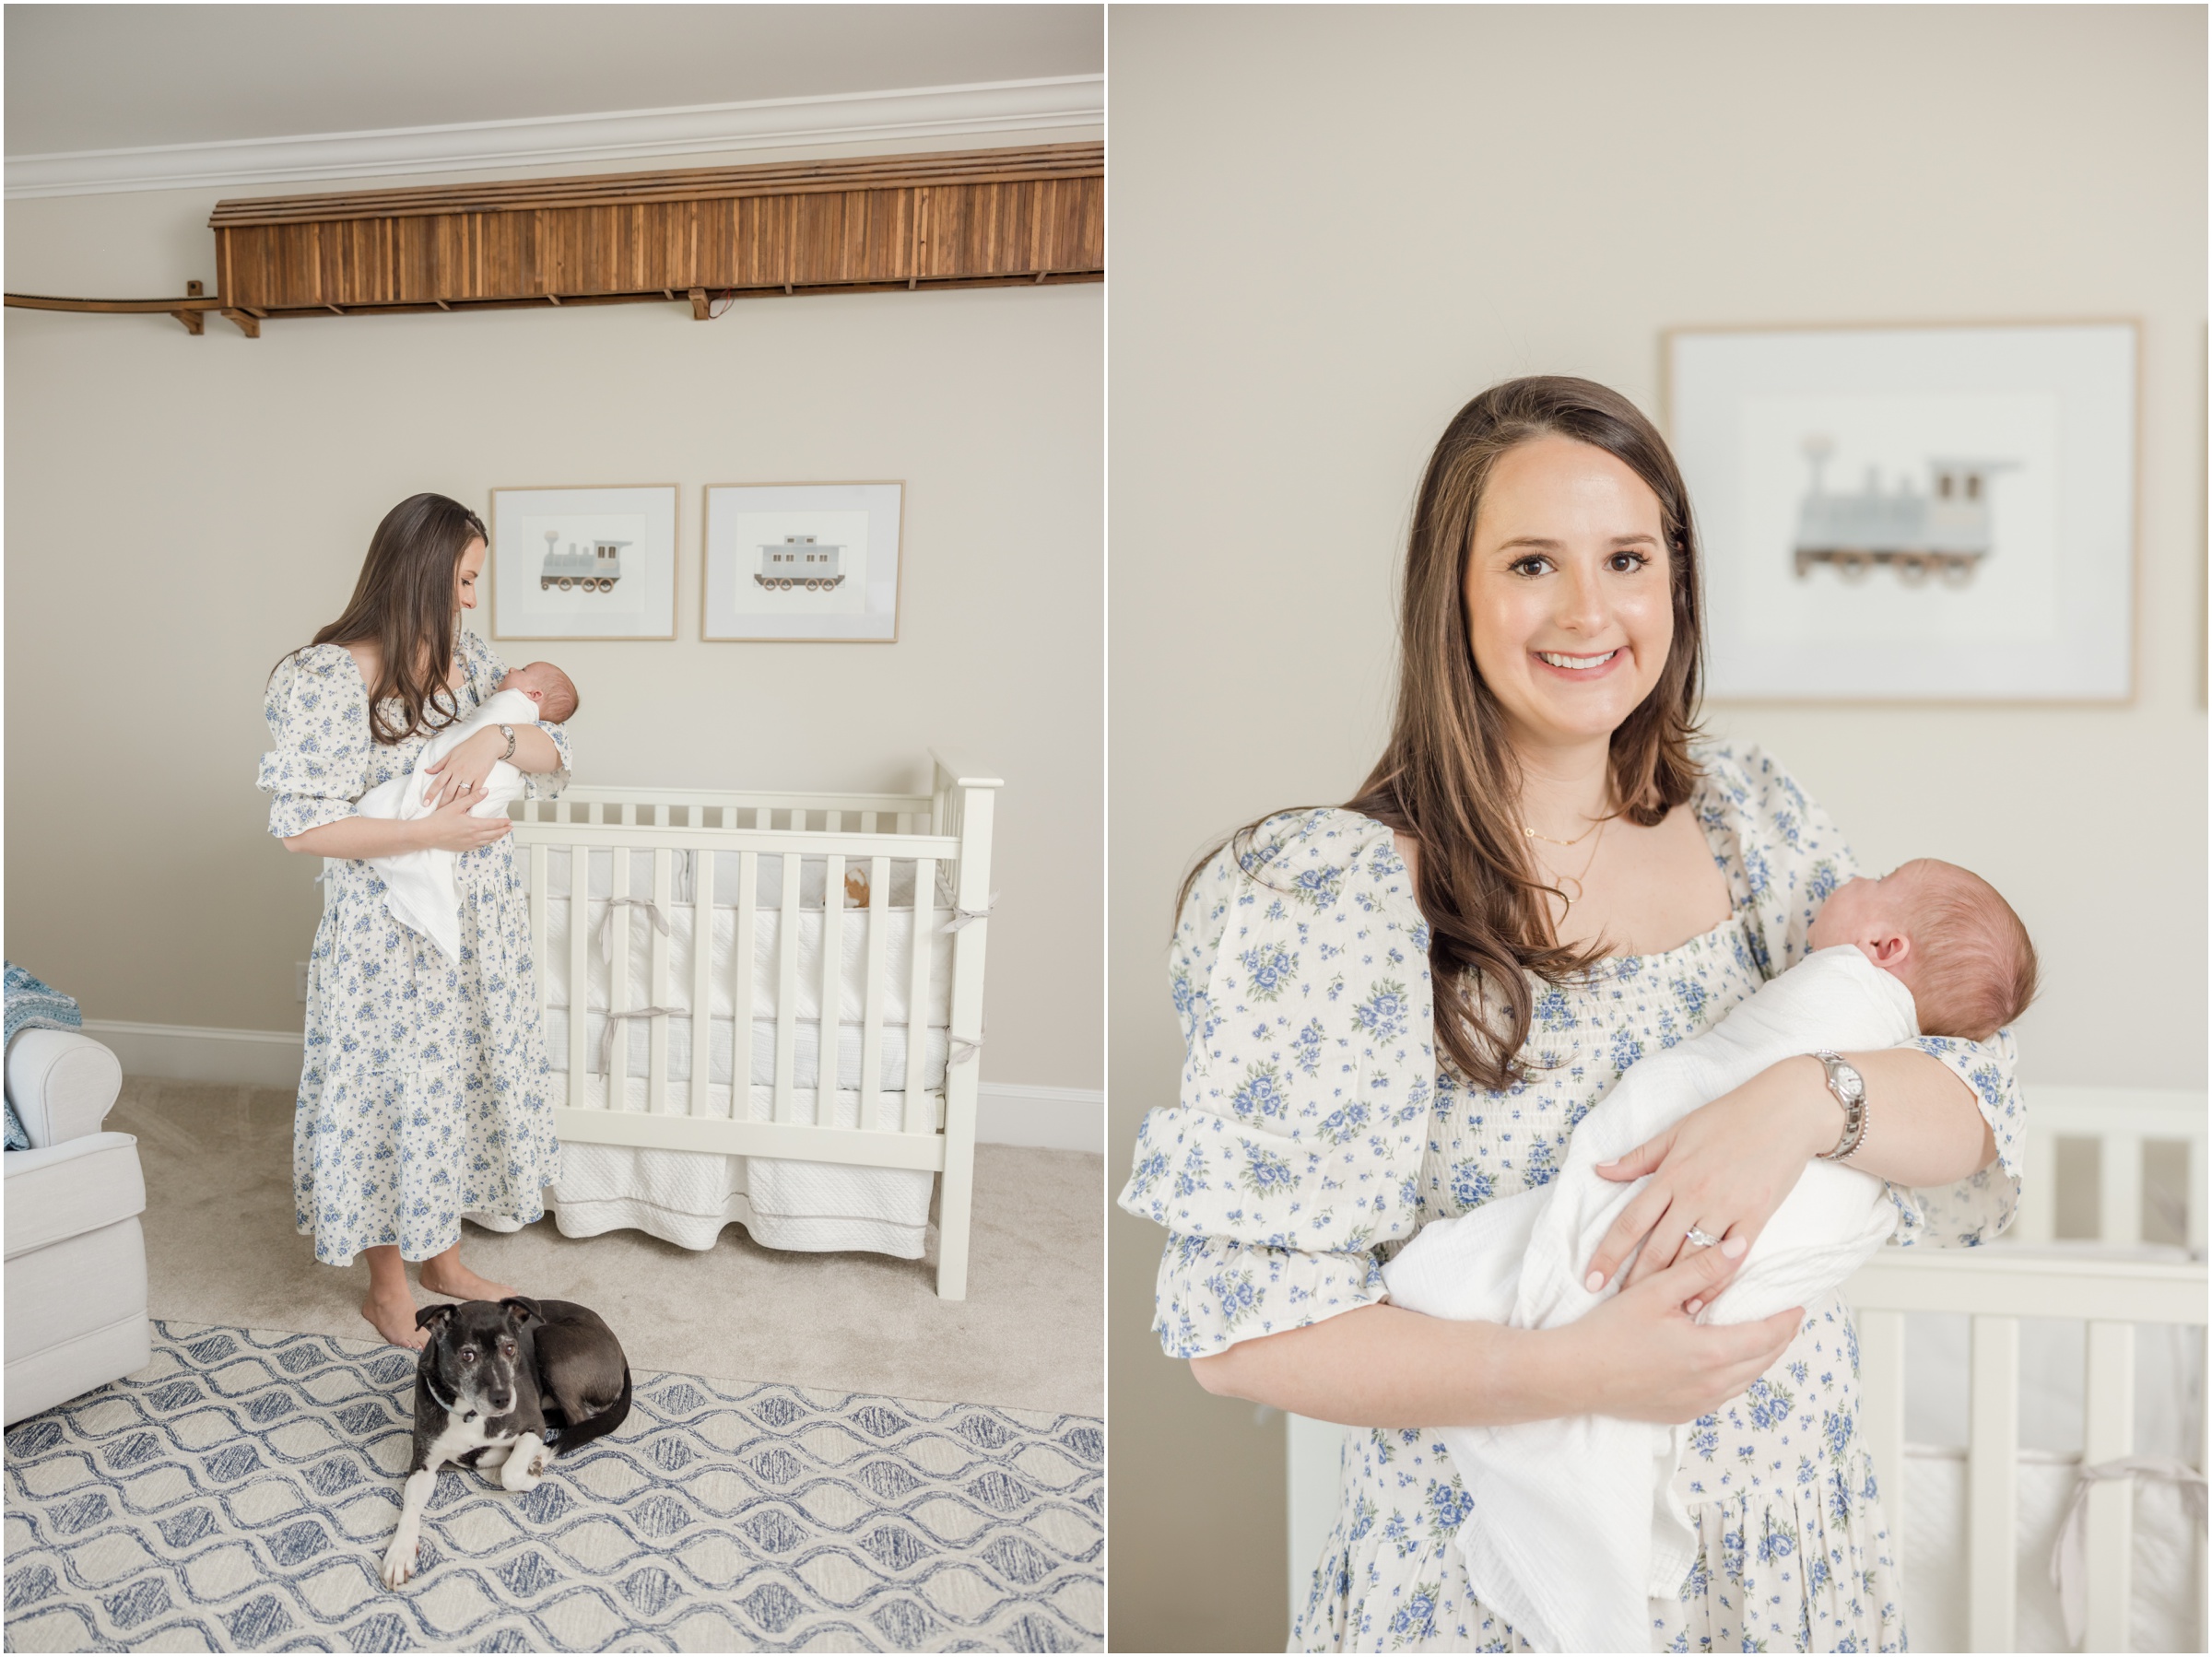 Portrait of a mother holding her newborn son while a small black and white dog lays at her feet during a Greenville newborn photography session.